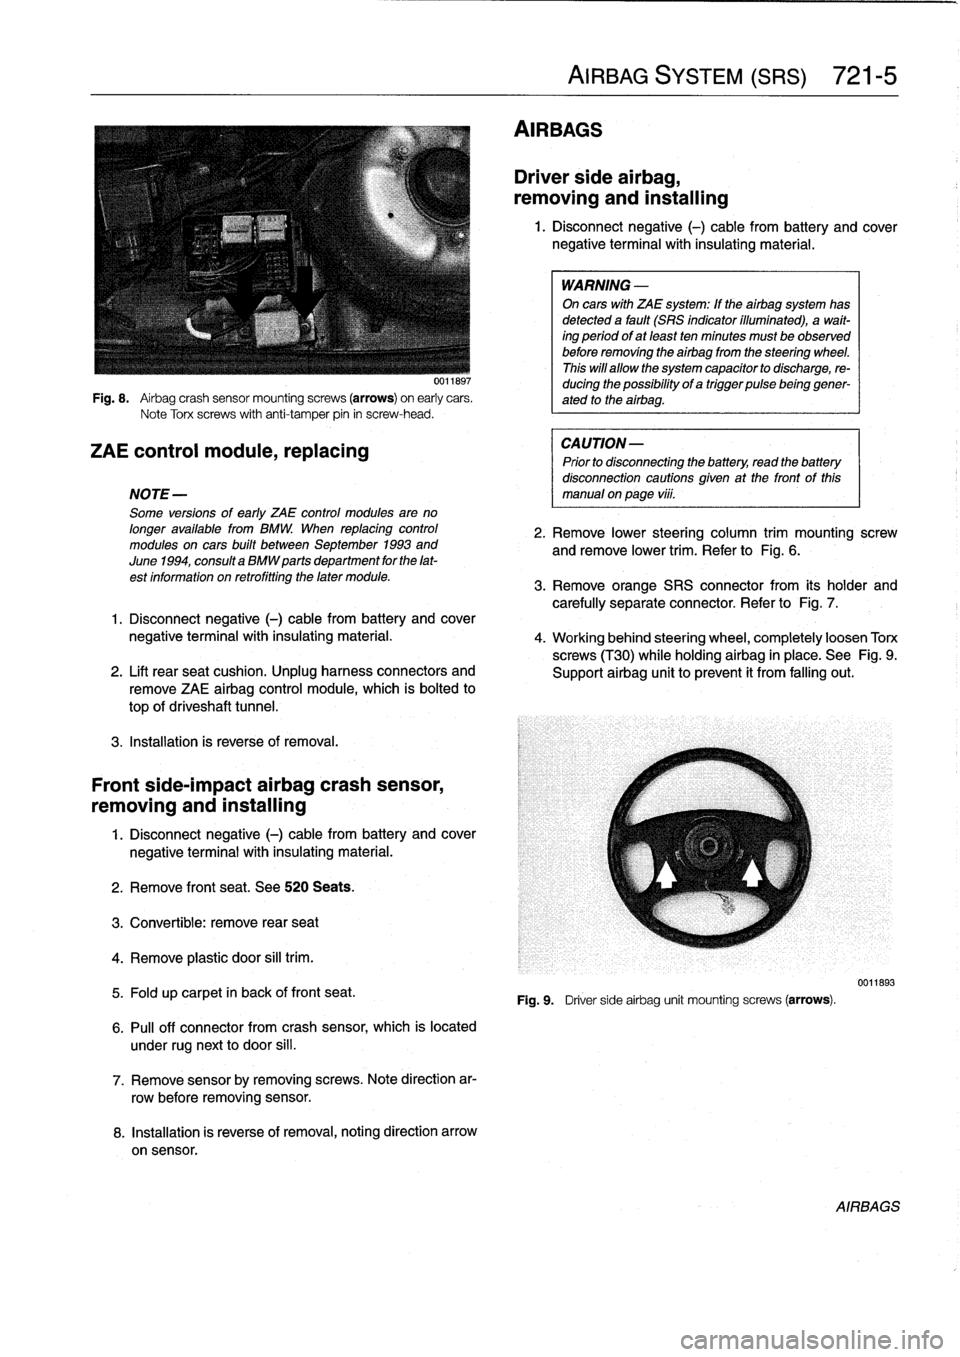 BMW 328i 1994 E36 Workshop Manual 
Fig
.
8
.

	

Airbag
crash
sensor
mountingscrews
(arrows)
on
early
cars
.
Note
Torx
screws
with
anti-tamper
pin
in
screw-head
.

ZAE
control
module,
replacing

NOTE-

Some
versions
of
early
ZAE
contr